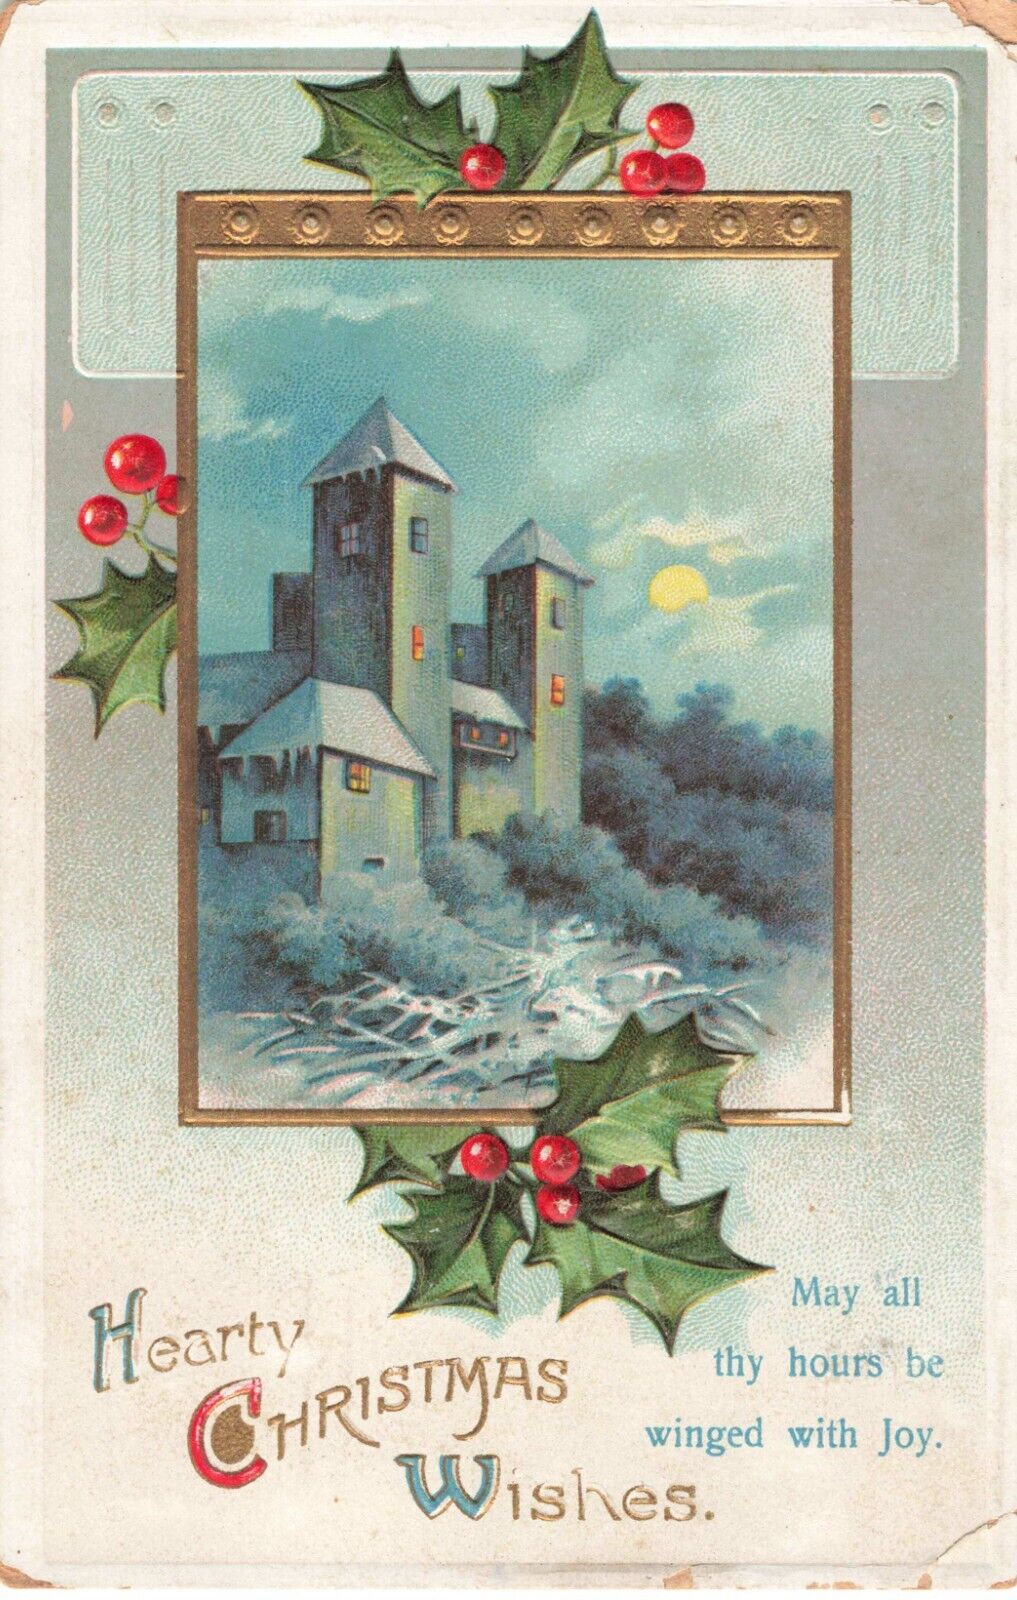 Hearty Christmas Wishes, Holly Castle Scene Embossed, Vintage Postcard